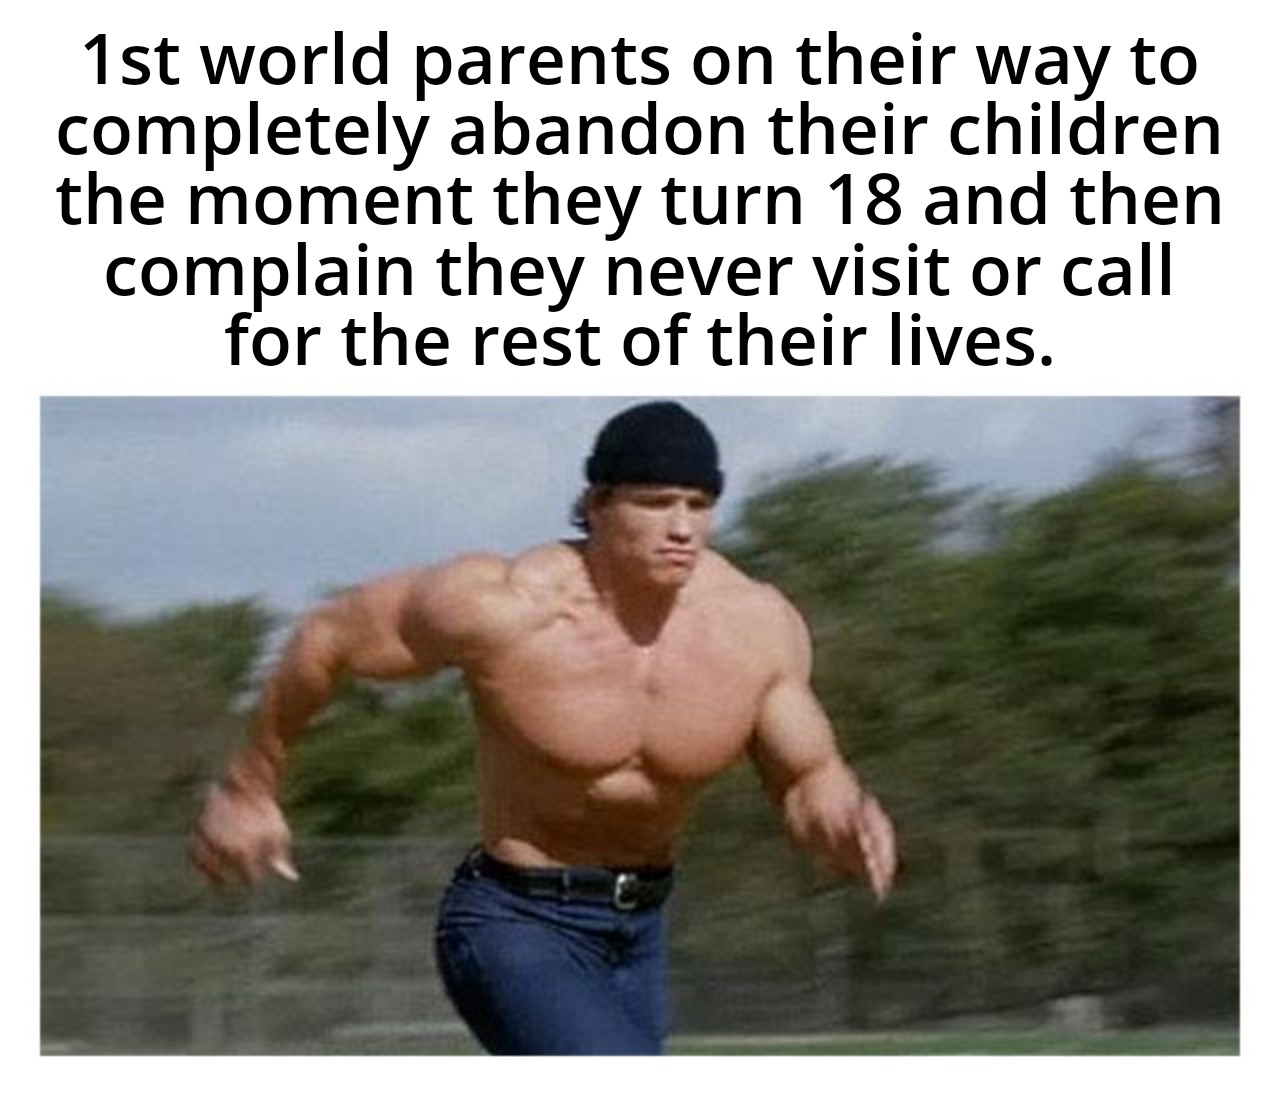 dank memes - Meme - 1st world parents on their way to completely abandon their children the moment they turn 18 and then complain they never visit or call for the rest of their lives.